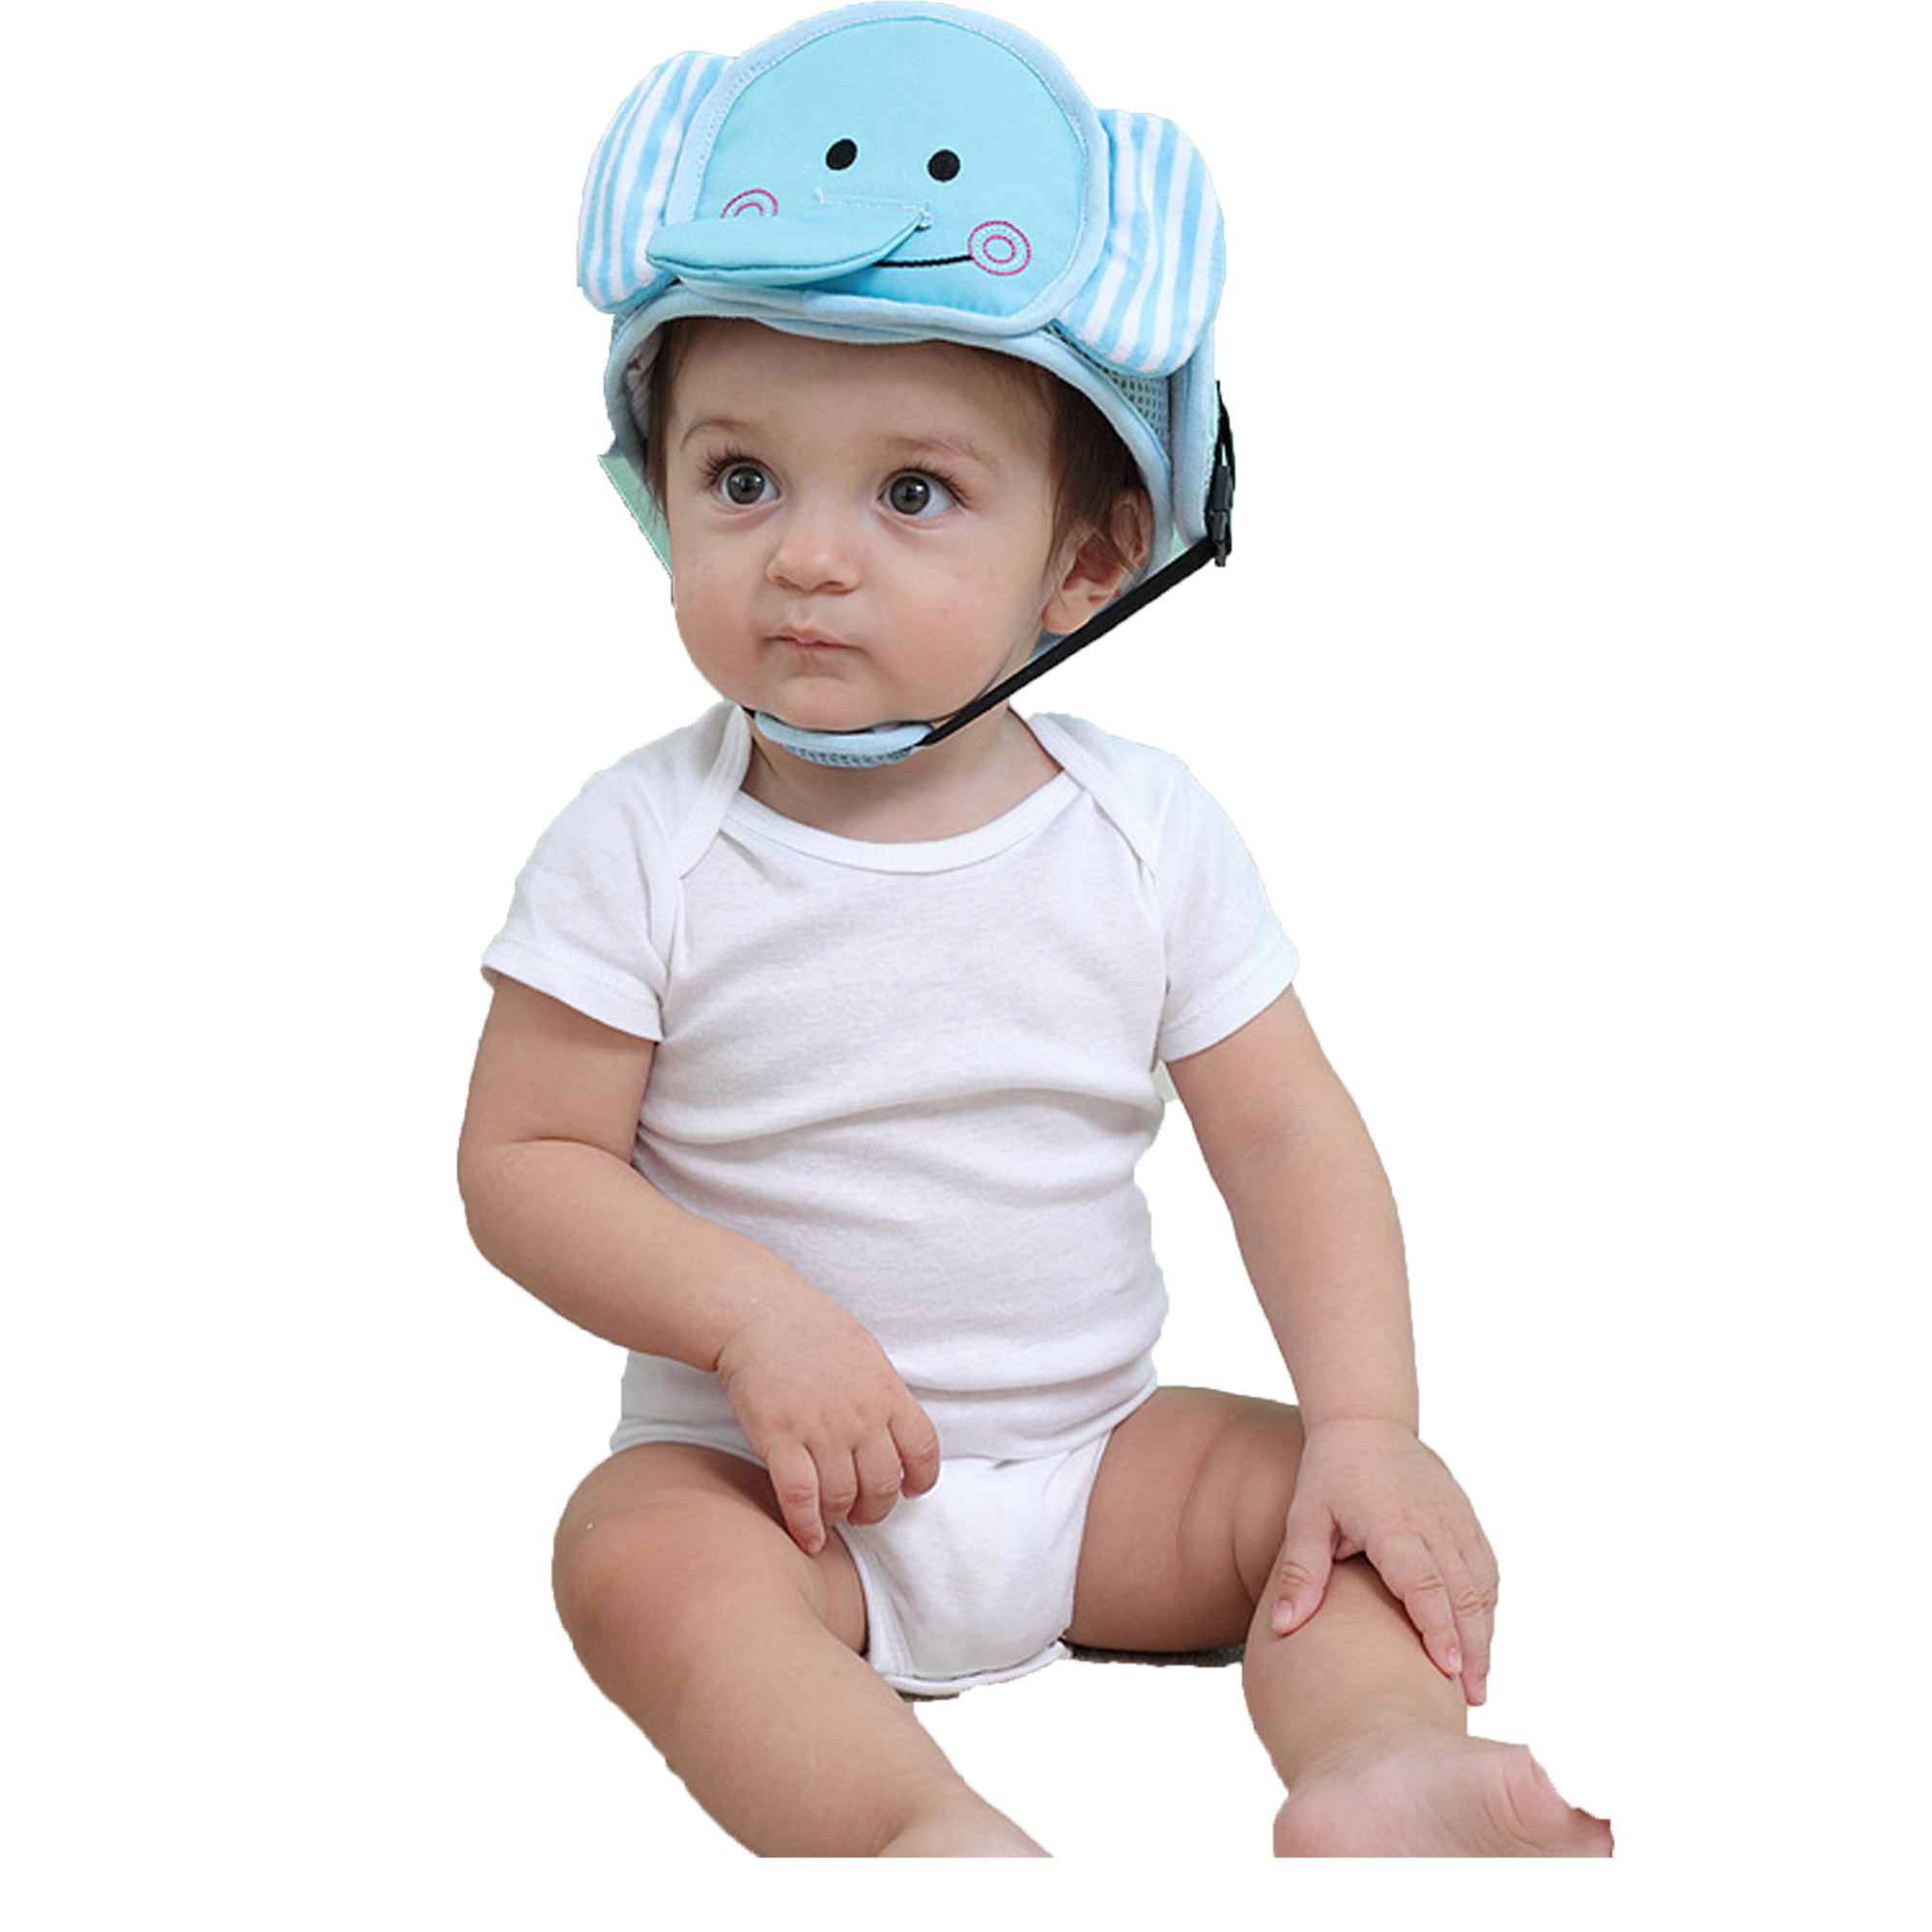 For Walking Infant Toddler Safety Helmet Baby Kid Head Protect Hat Crawl Style 